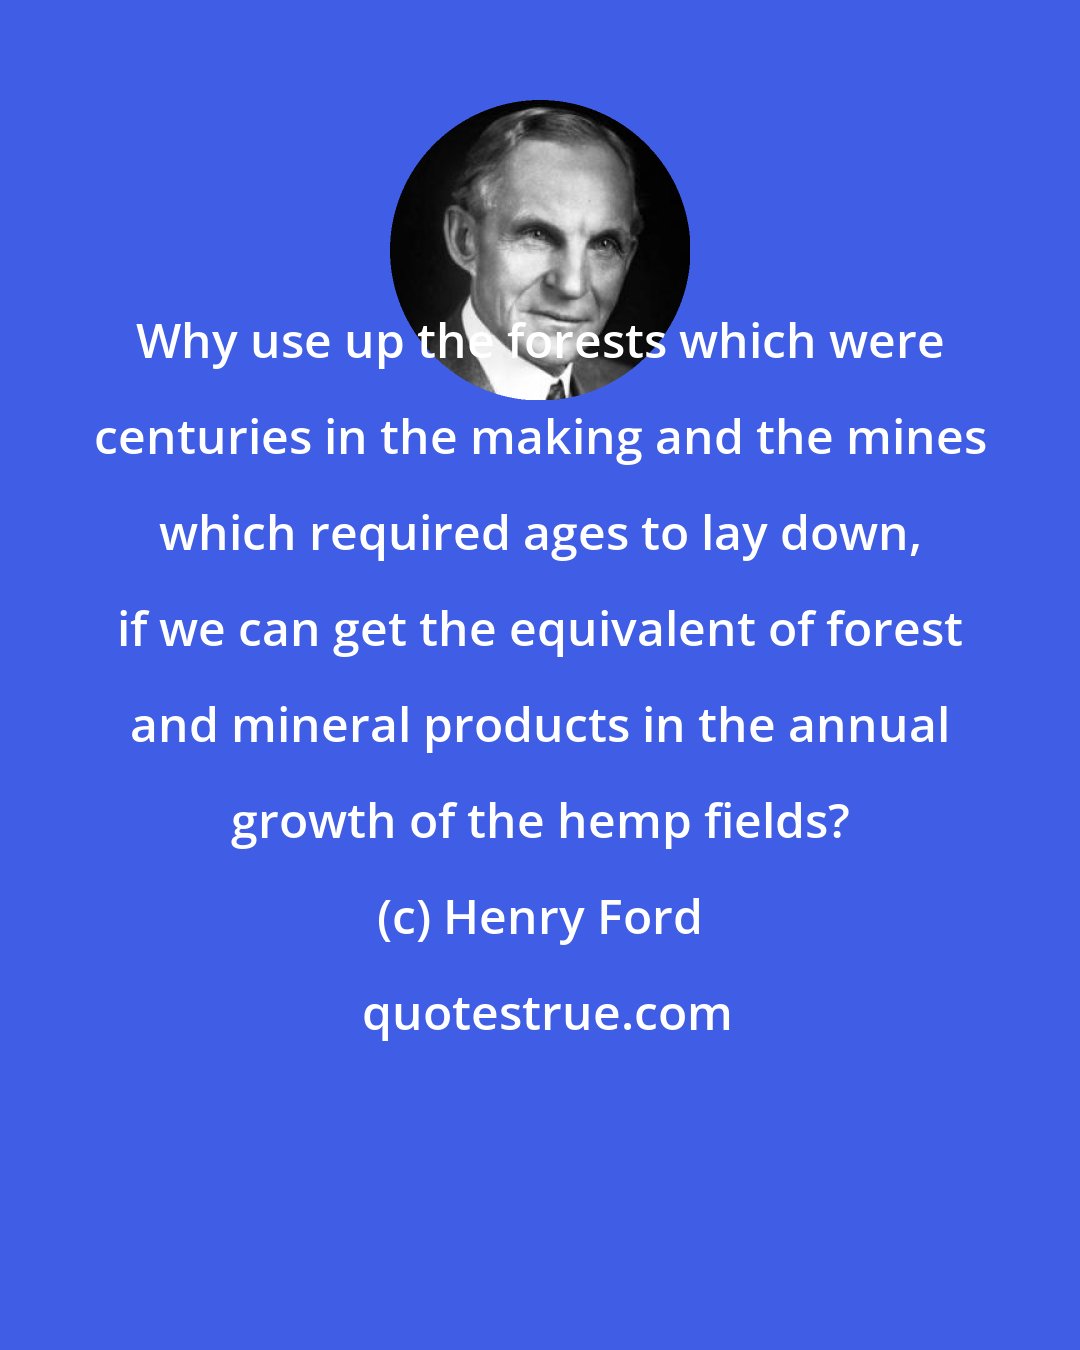 Henry Ford: Why use up the forests which were centuries in the making and the mines which required ages to lay down, if we can get the equivalent of forest and mineral products in the annual growth of the hemp fields?